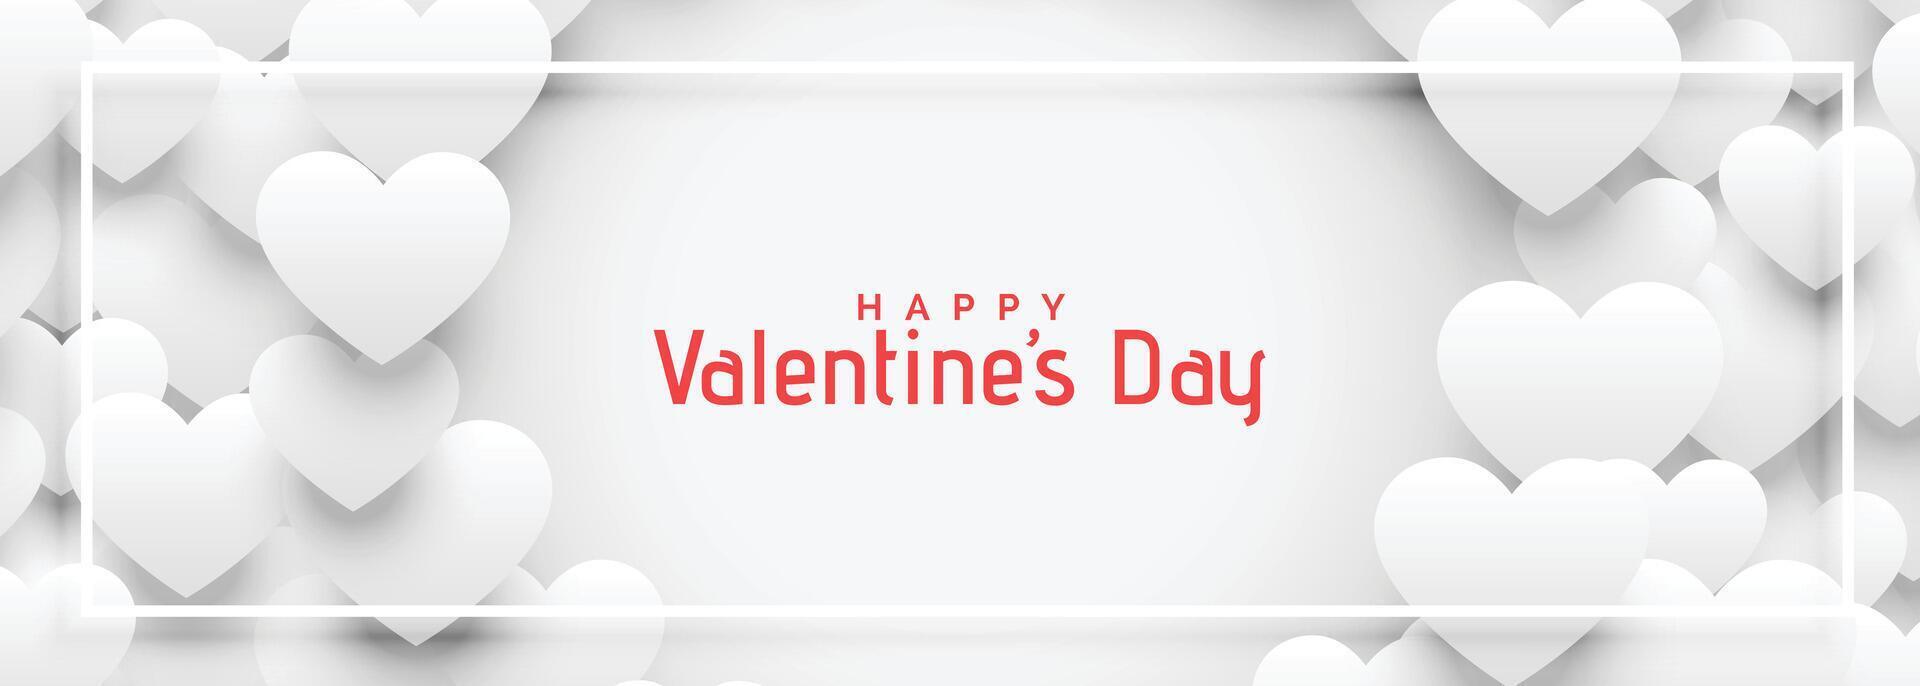 white 3d hearts banner for valentines day vector